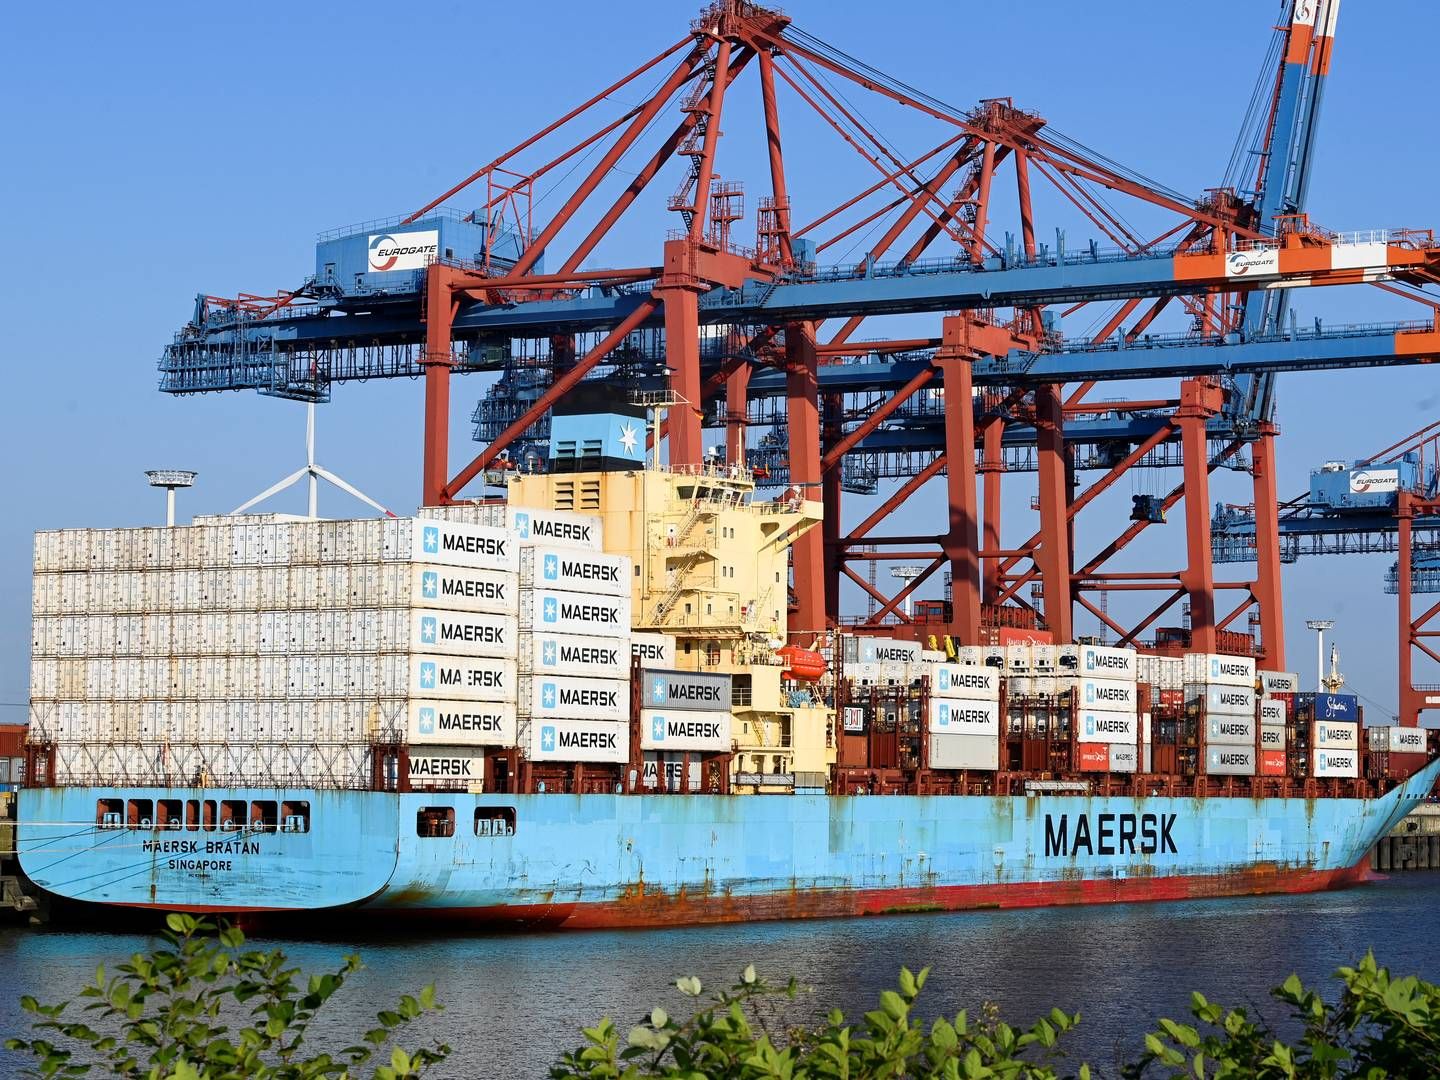 Maersk has been an important supplier of transportation to the US government for decades through its subsidiary, Maersk Line Limited, and the group will continue to transport goods for the government on container ships, but has now sold its tankers. | Photo: Fabian Bimmer/Reuters/Ritzau Scanpix